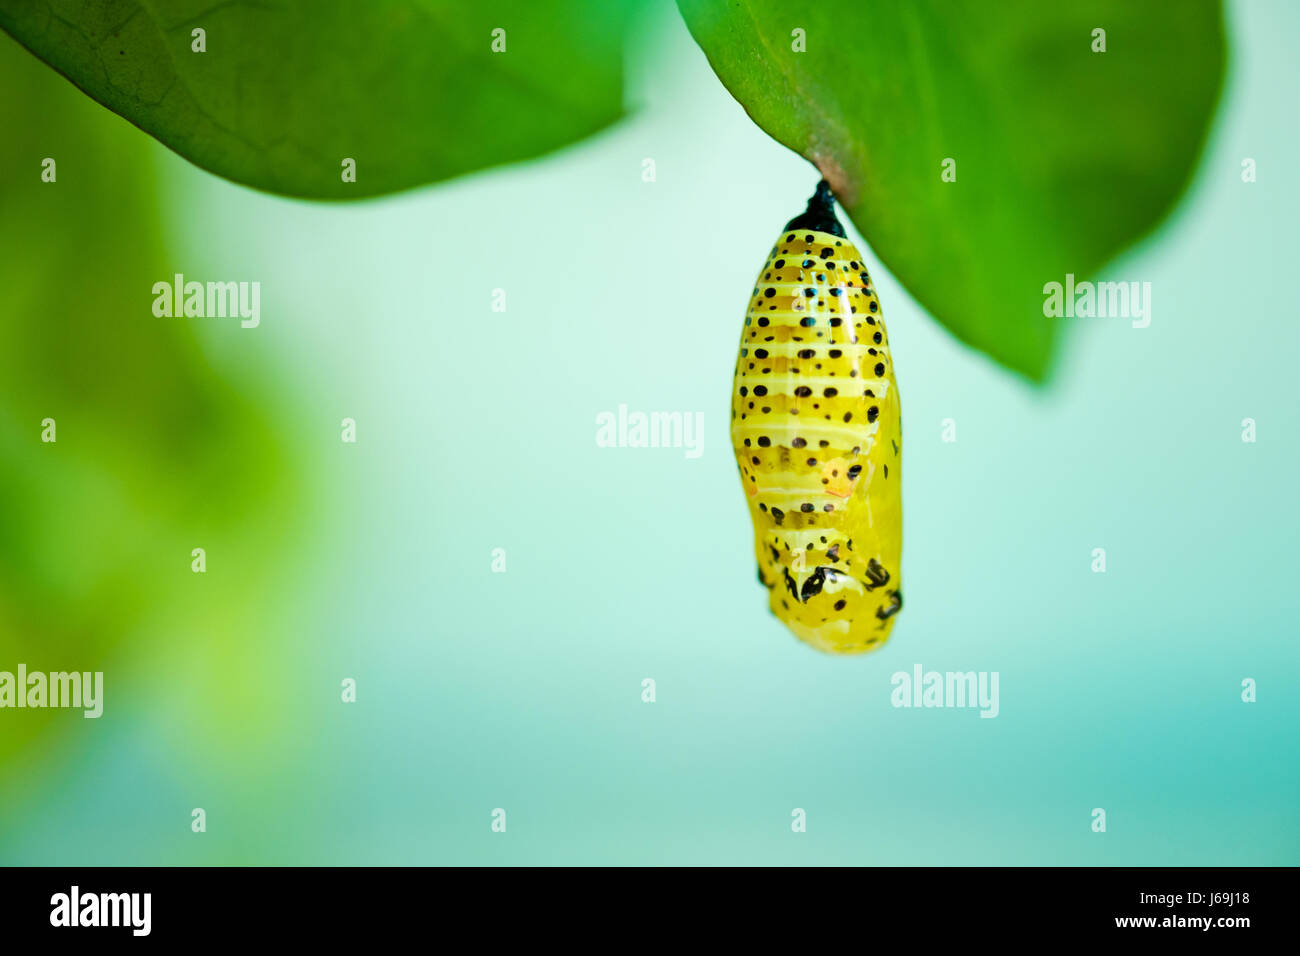 Chrysalis of Butterfly Stock Photo